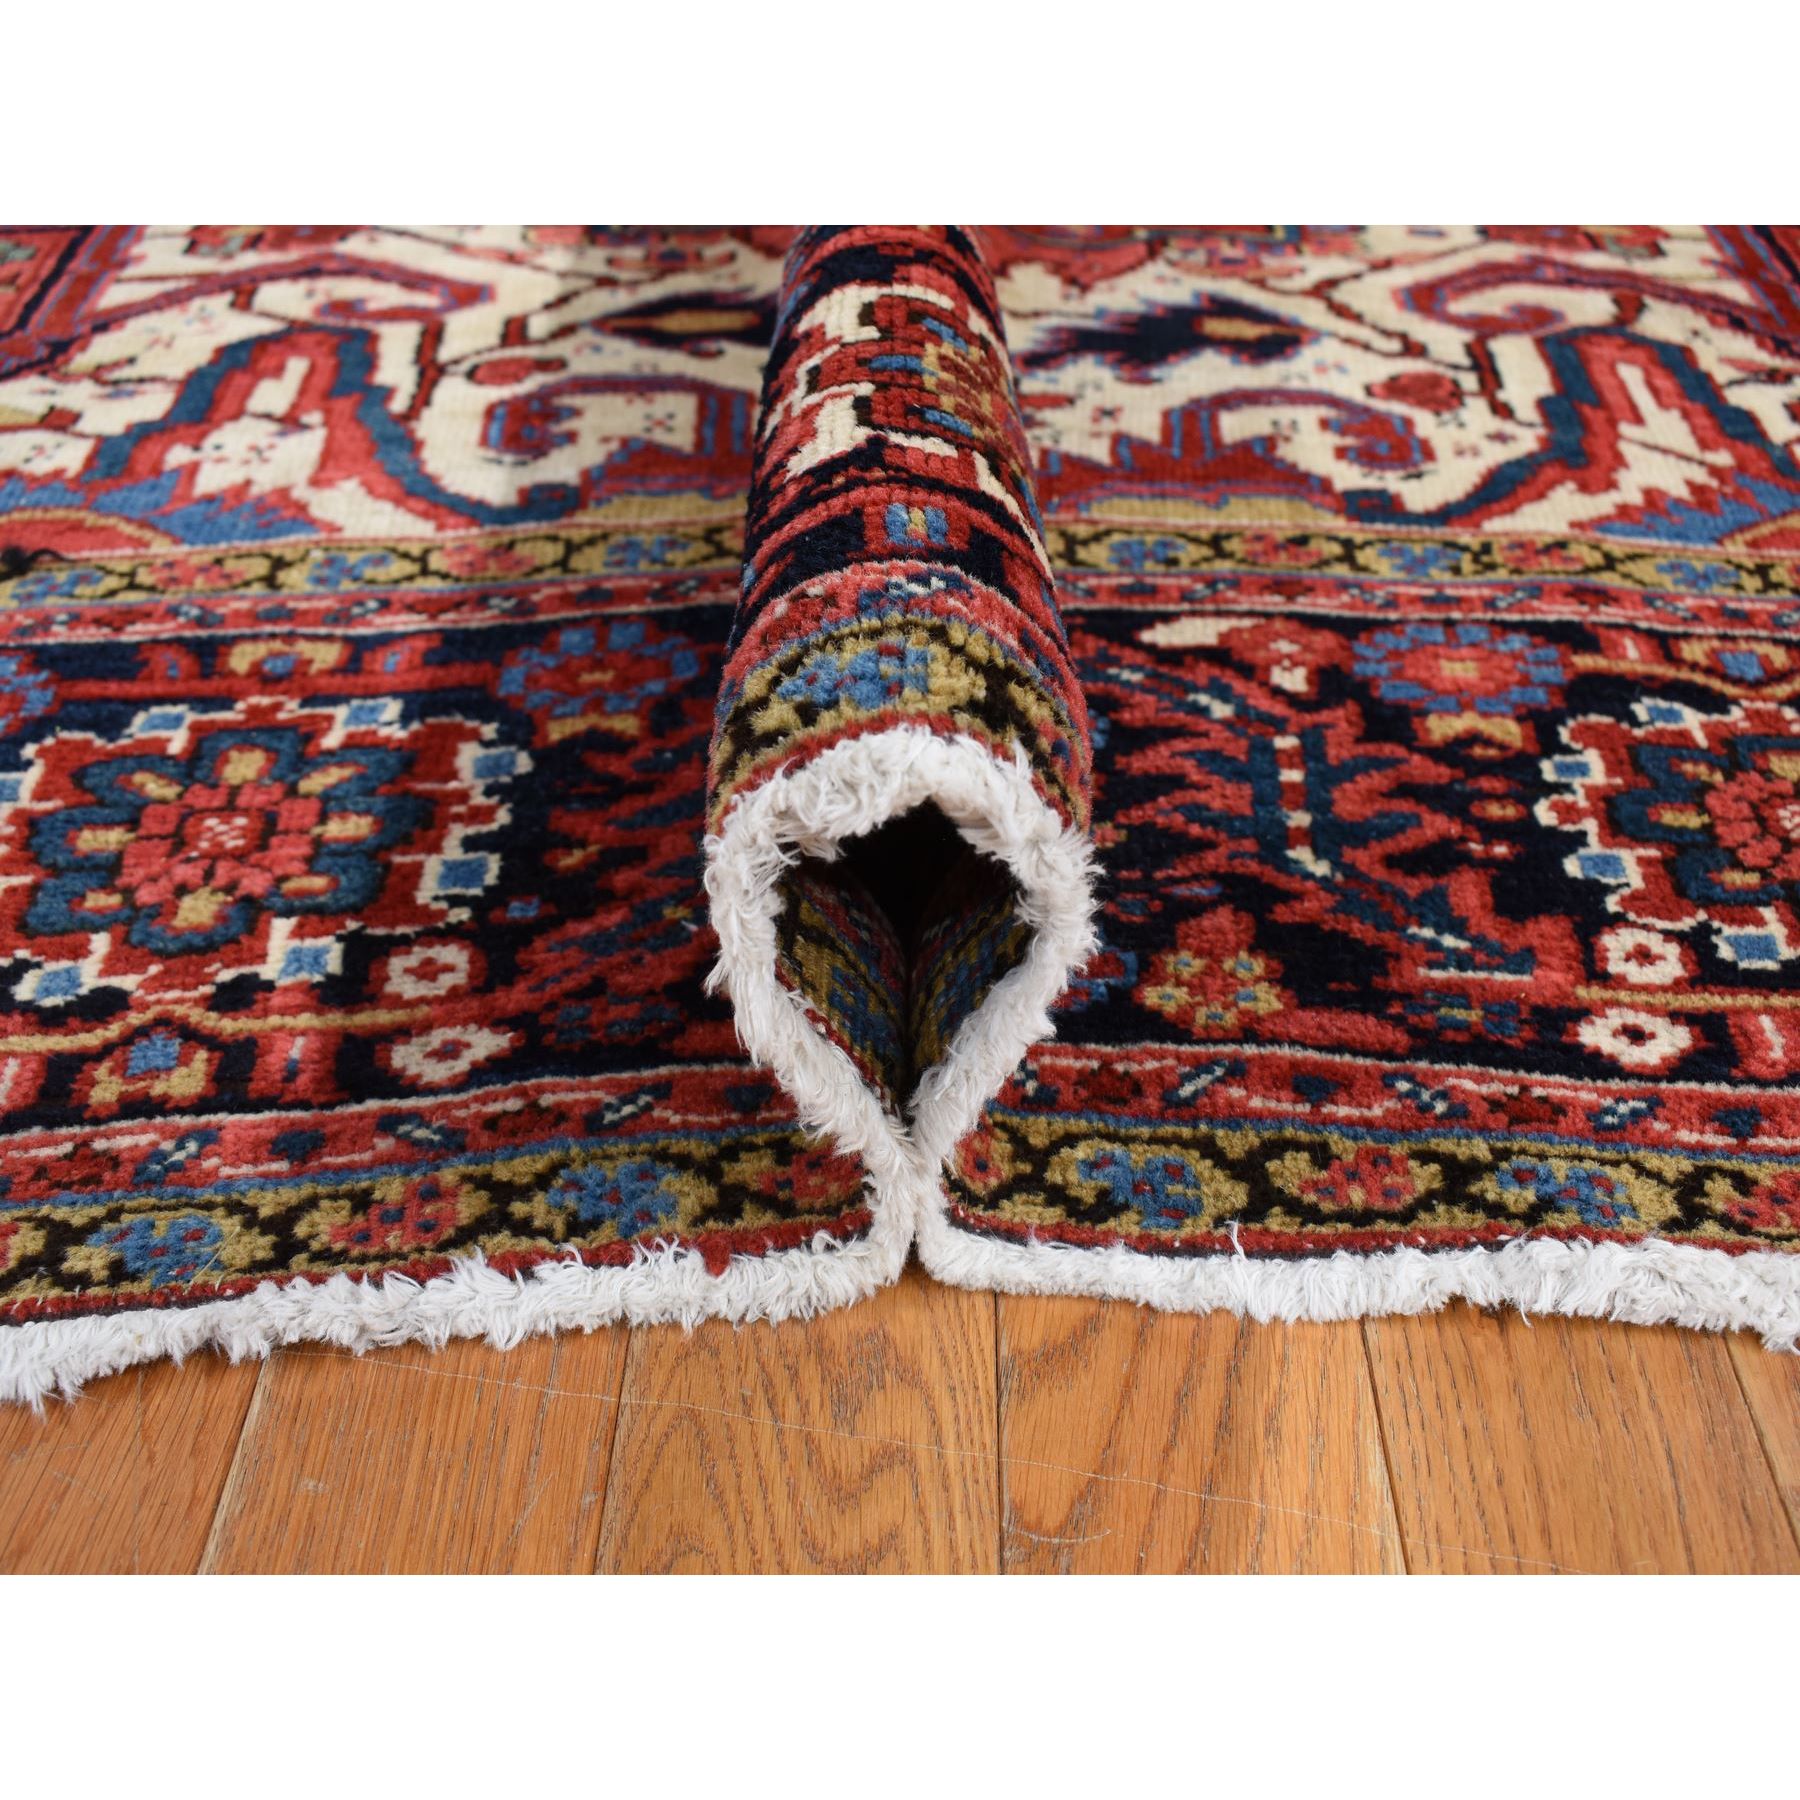  Wool Hand-Knotted Area Rug 8'7